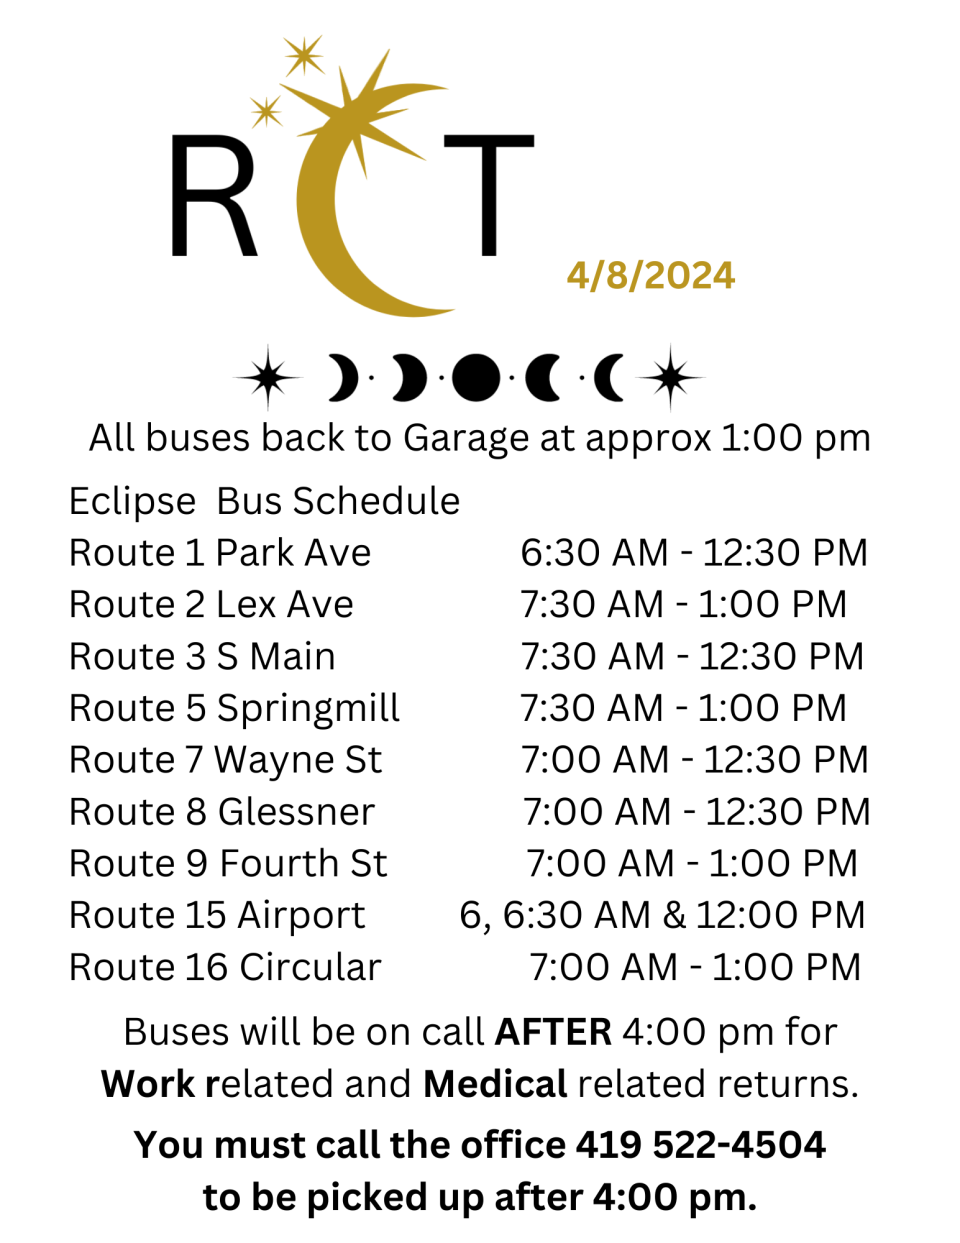 Richland County Transit has announced changes in service for Monday because of the total solar eclipse.